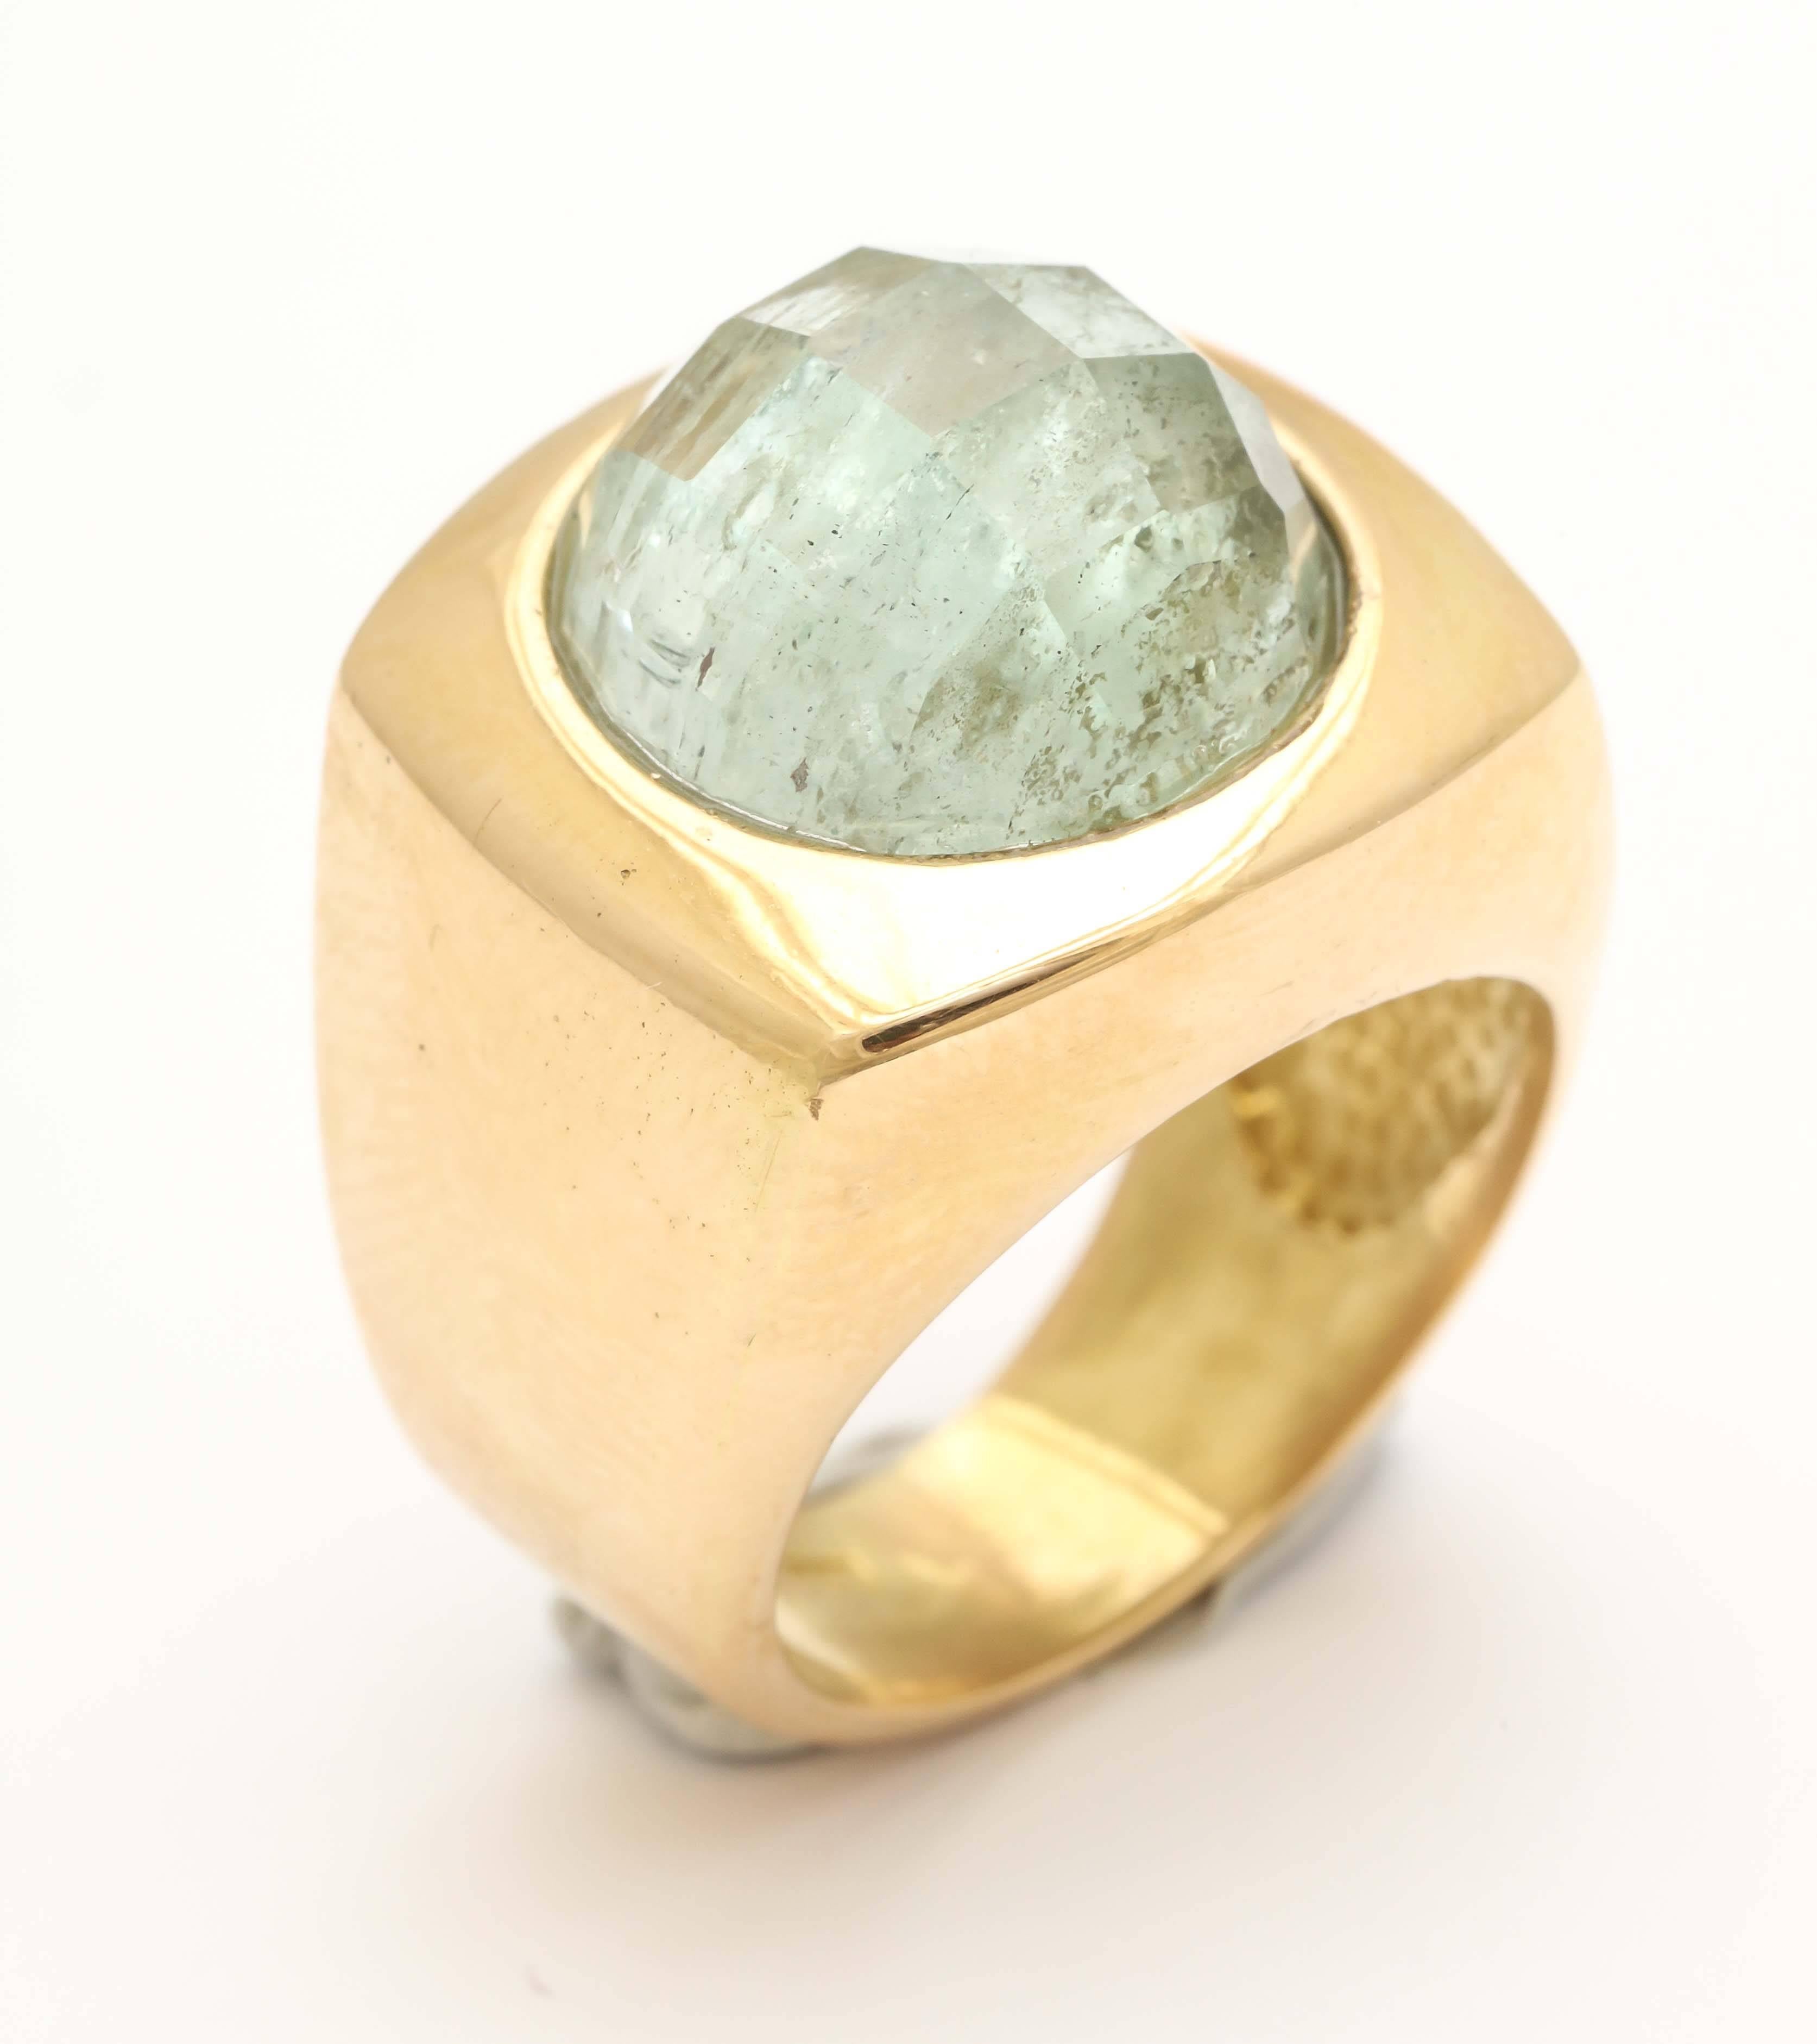 A fabulous designer ring in 18 kt gold with a interesting faceted rutilated quartz in a modernist setting.  This is a classical look with an exceptional design.